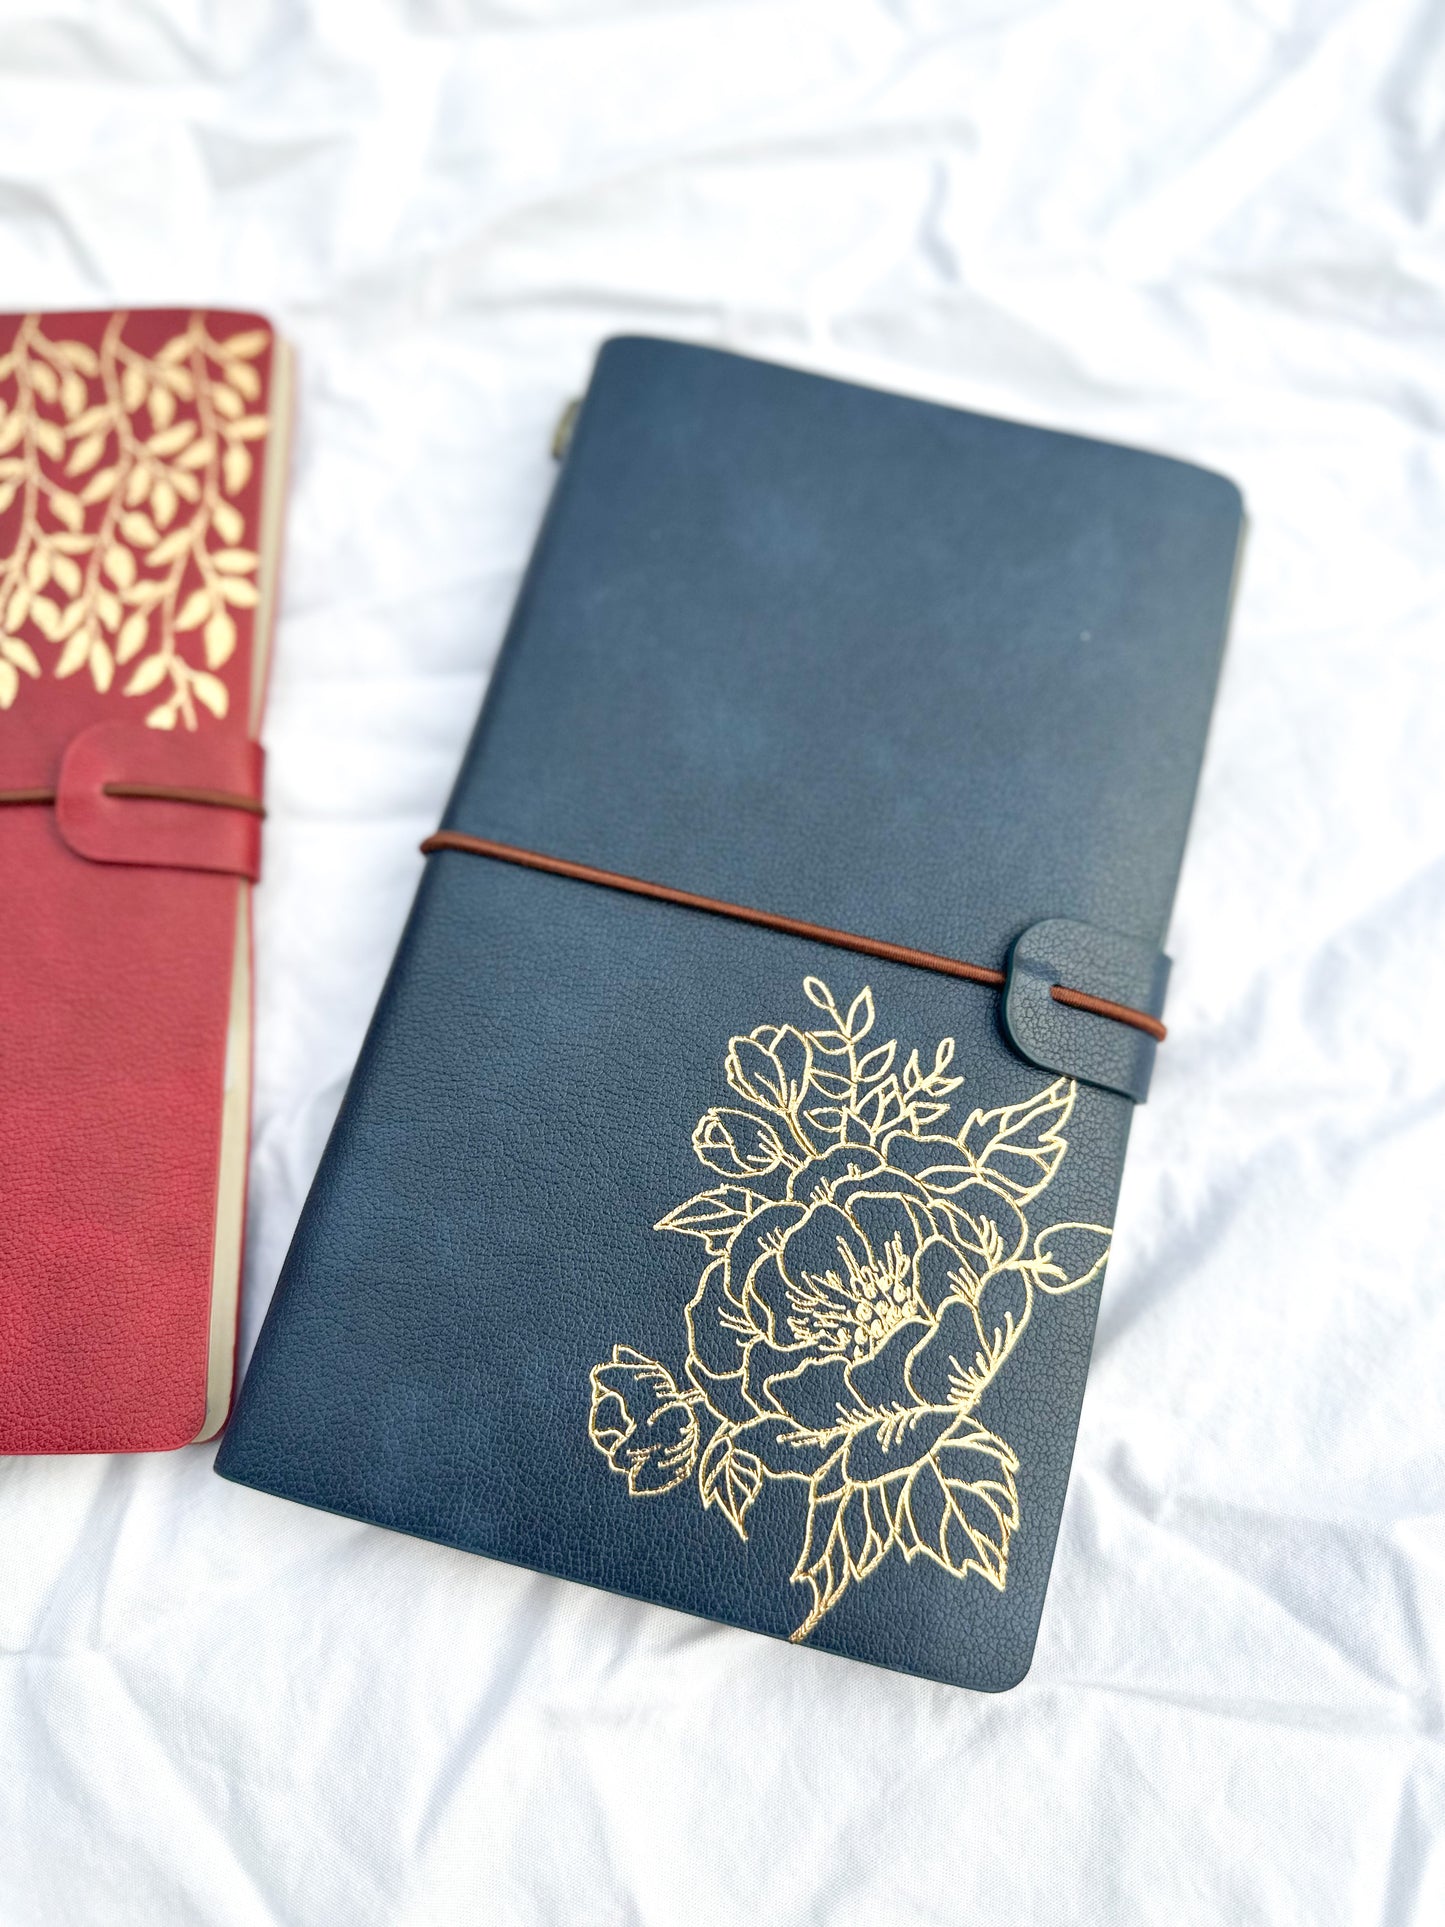 Foiling Workshop- Create Book Set or Journal and Bookmark